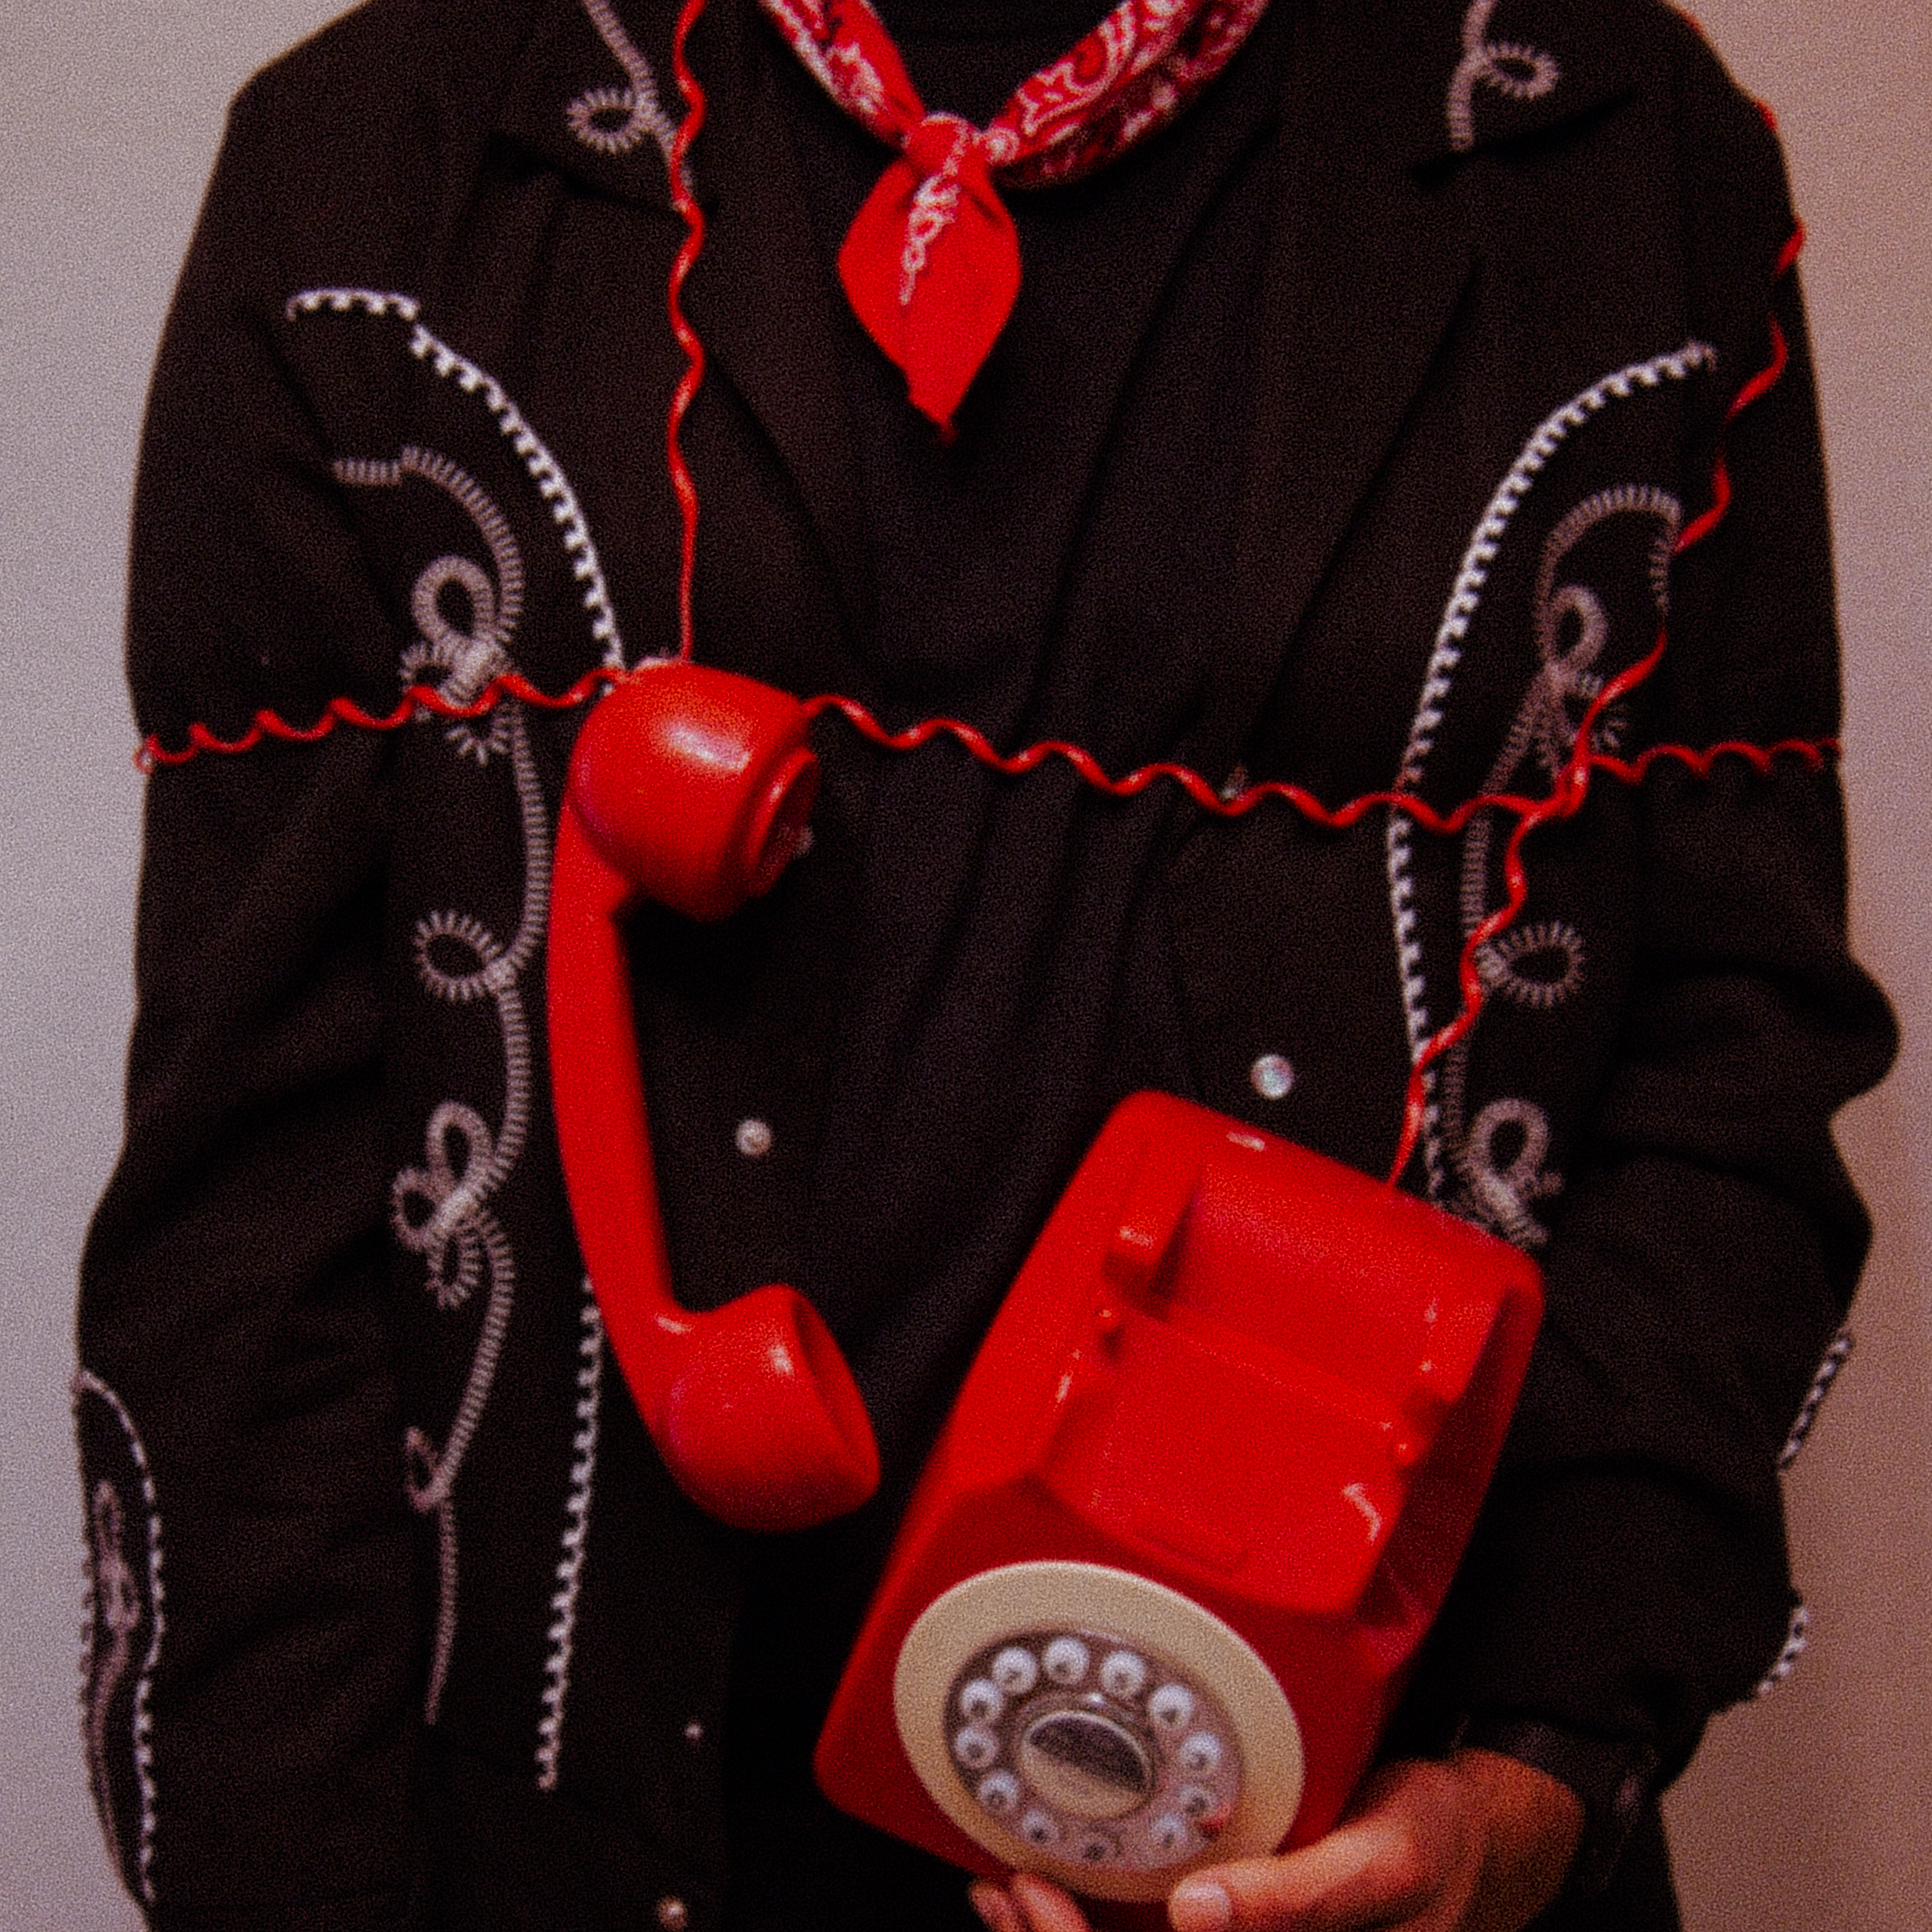 A man's torso wrapped in red telephone cord